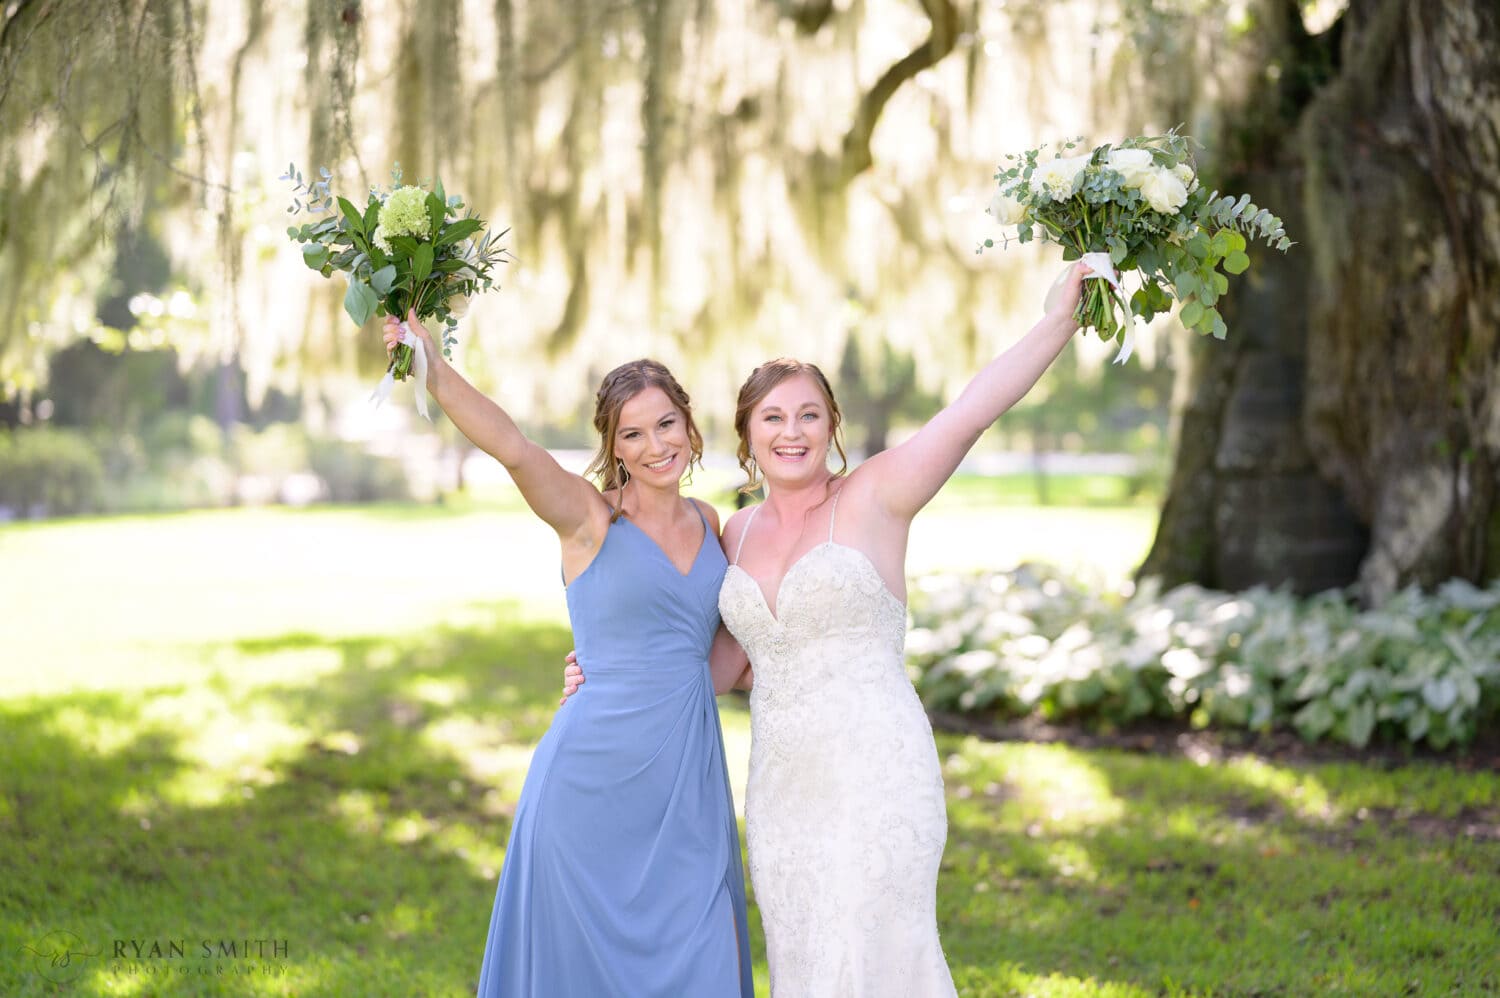 Fun pictures with the bride and bridemaids - Magnolia Plantation